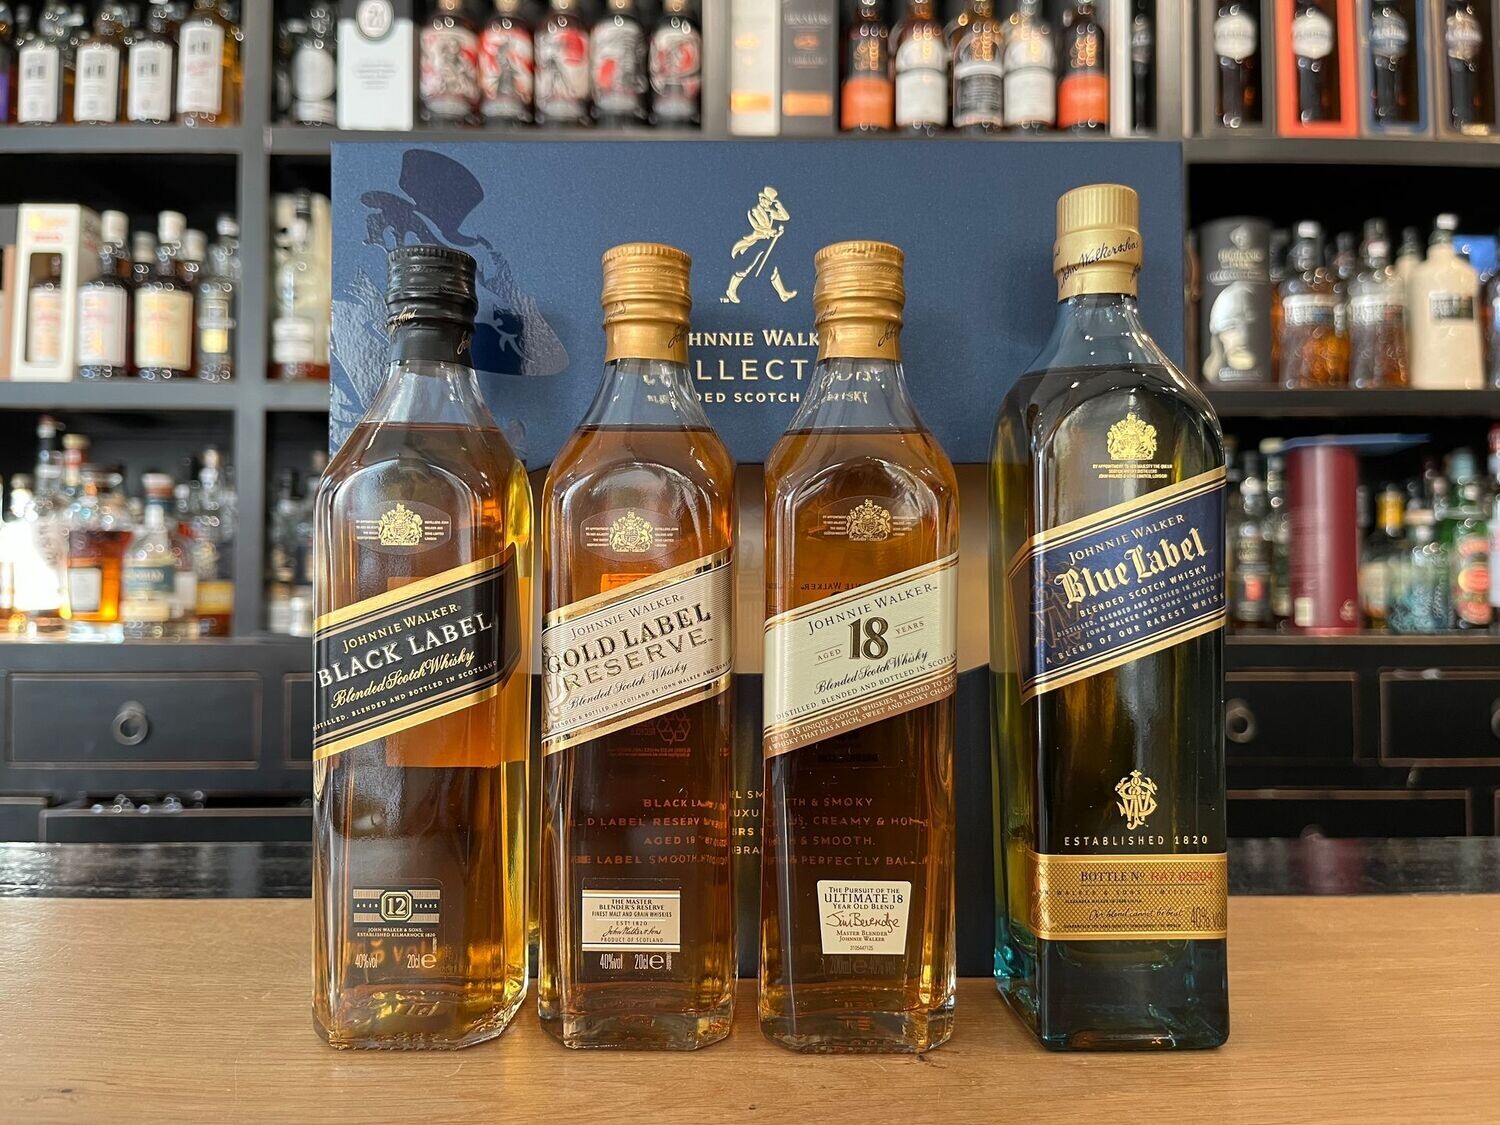 Johnnie Walker Collection Blended Scotch Whisky, 4x200ml